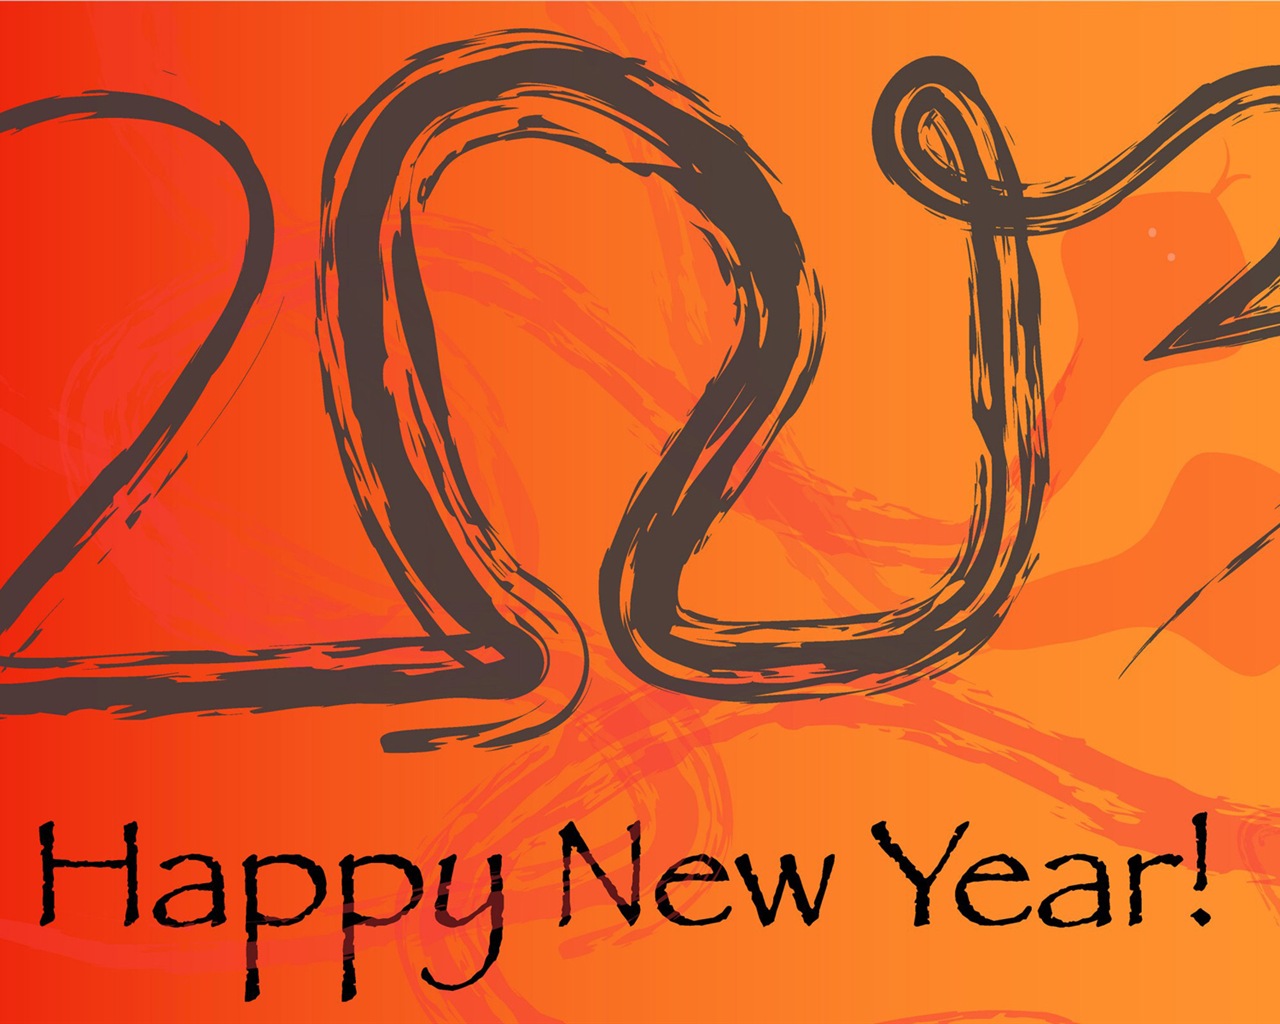 2013 Happy New Year HD wallpapers #11 - 1280x1024